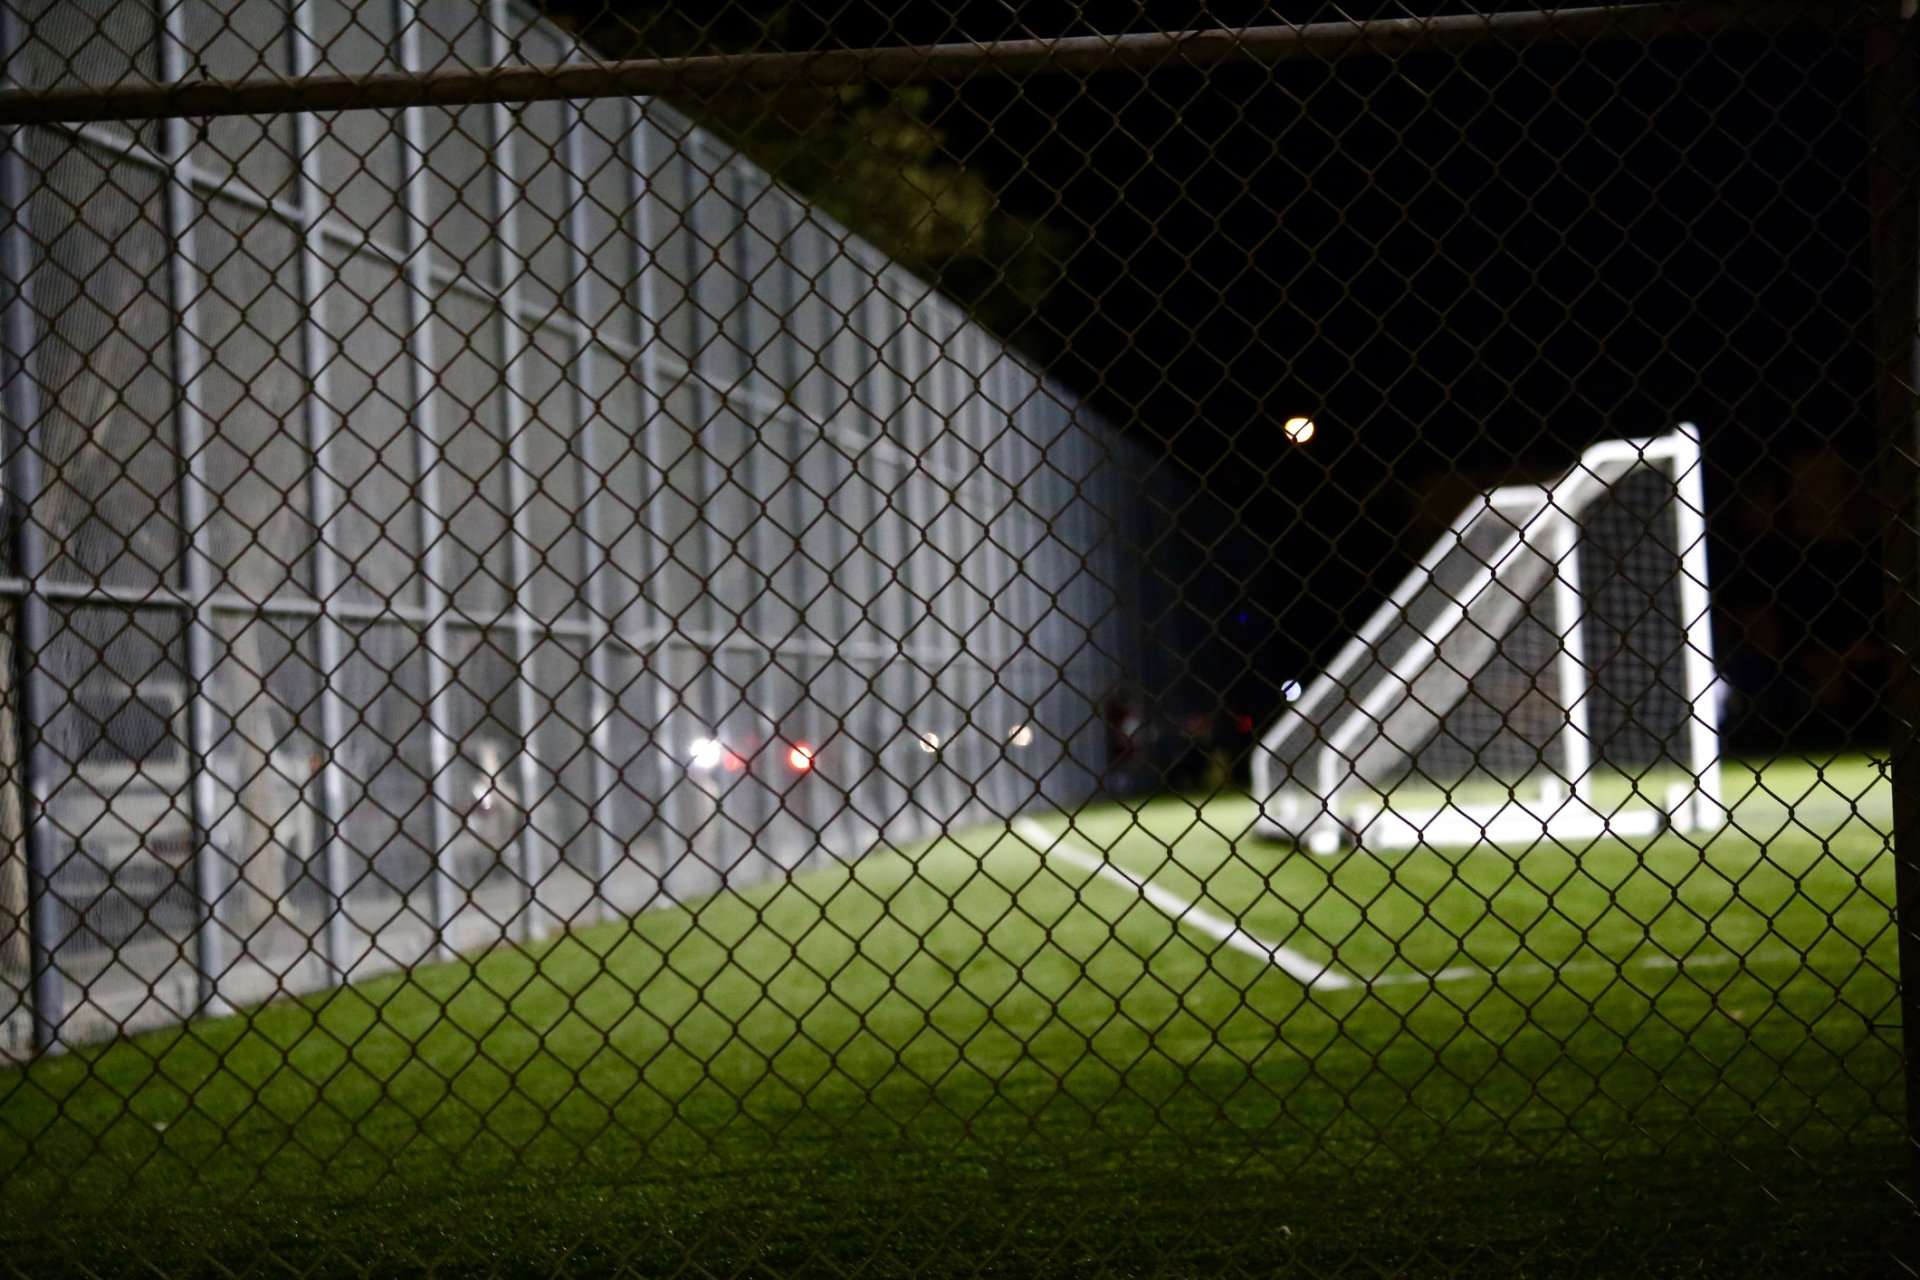 A soccer field with goal posts and lights at night.